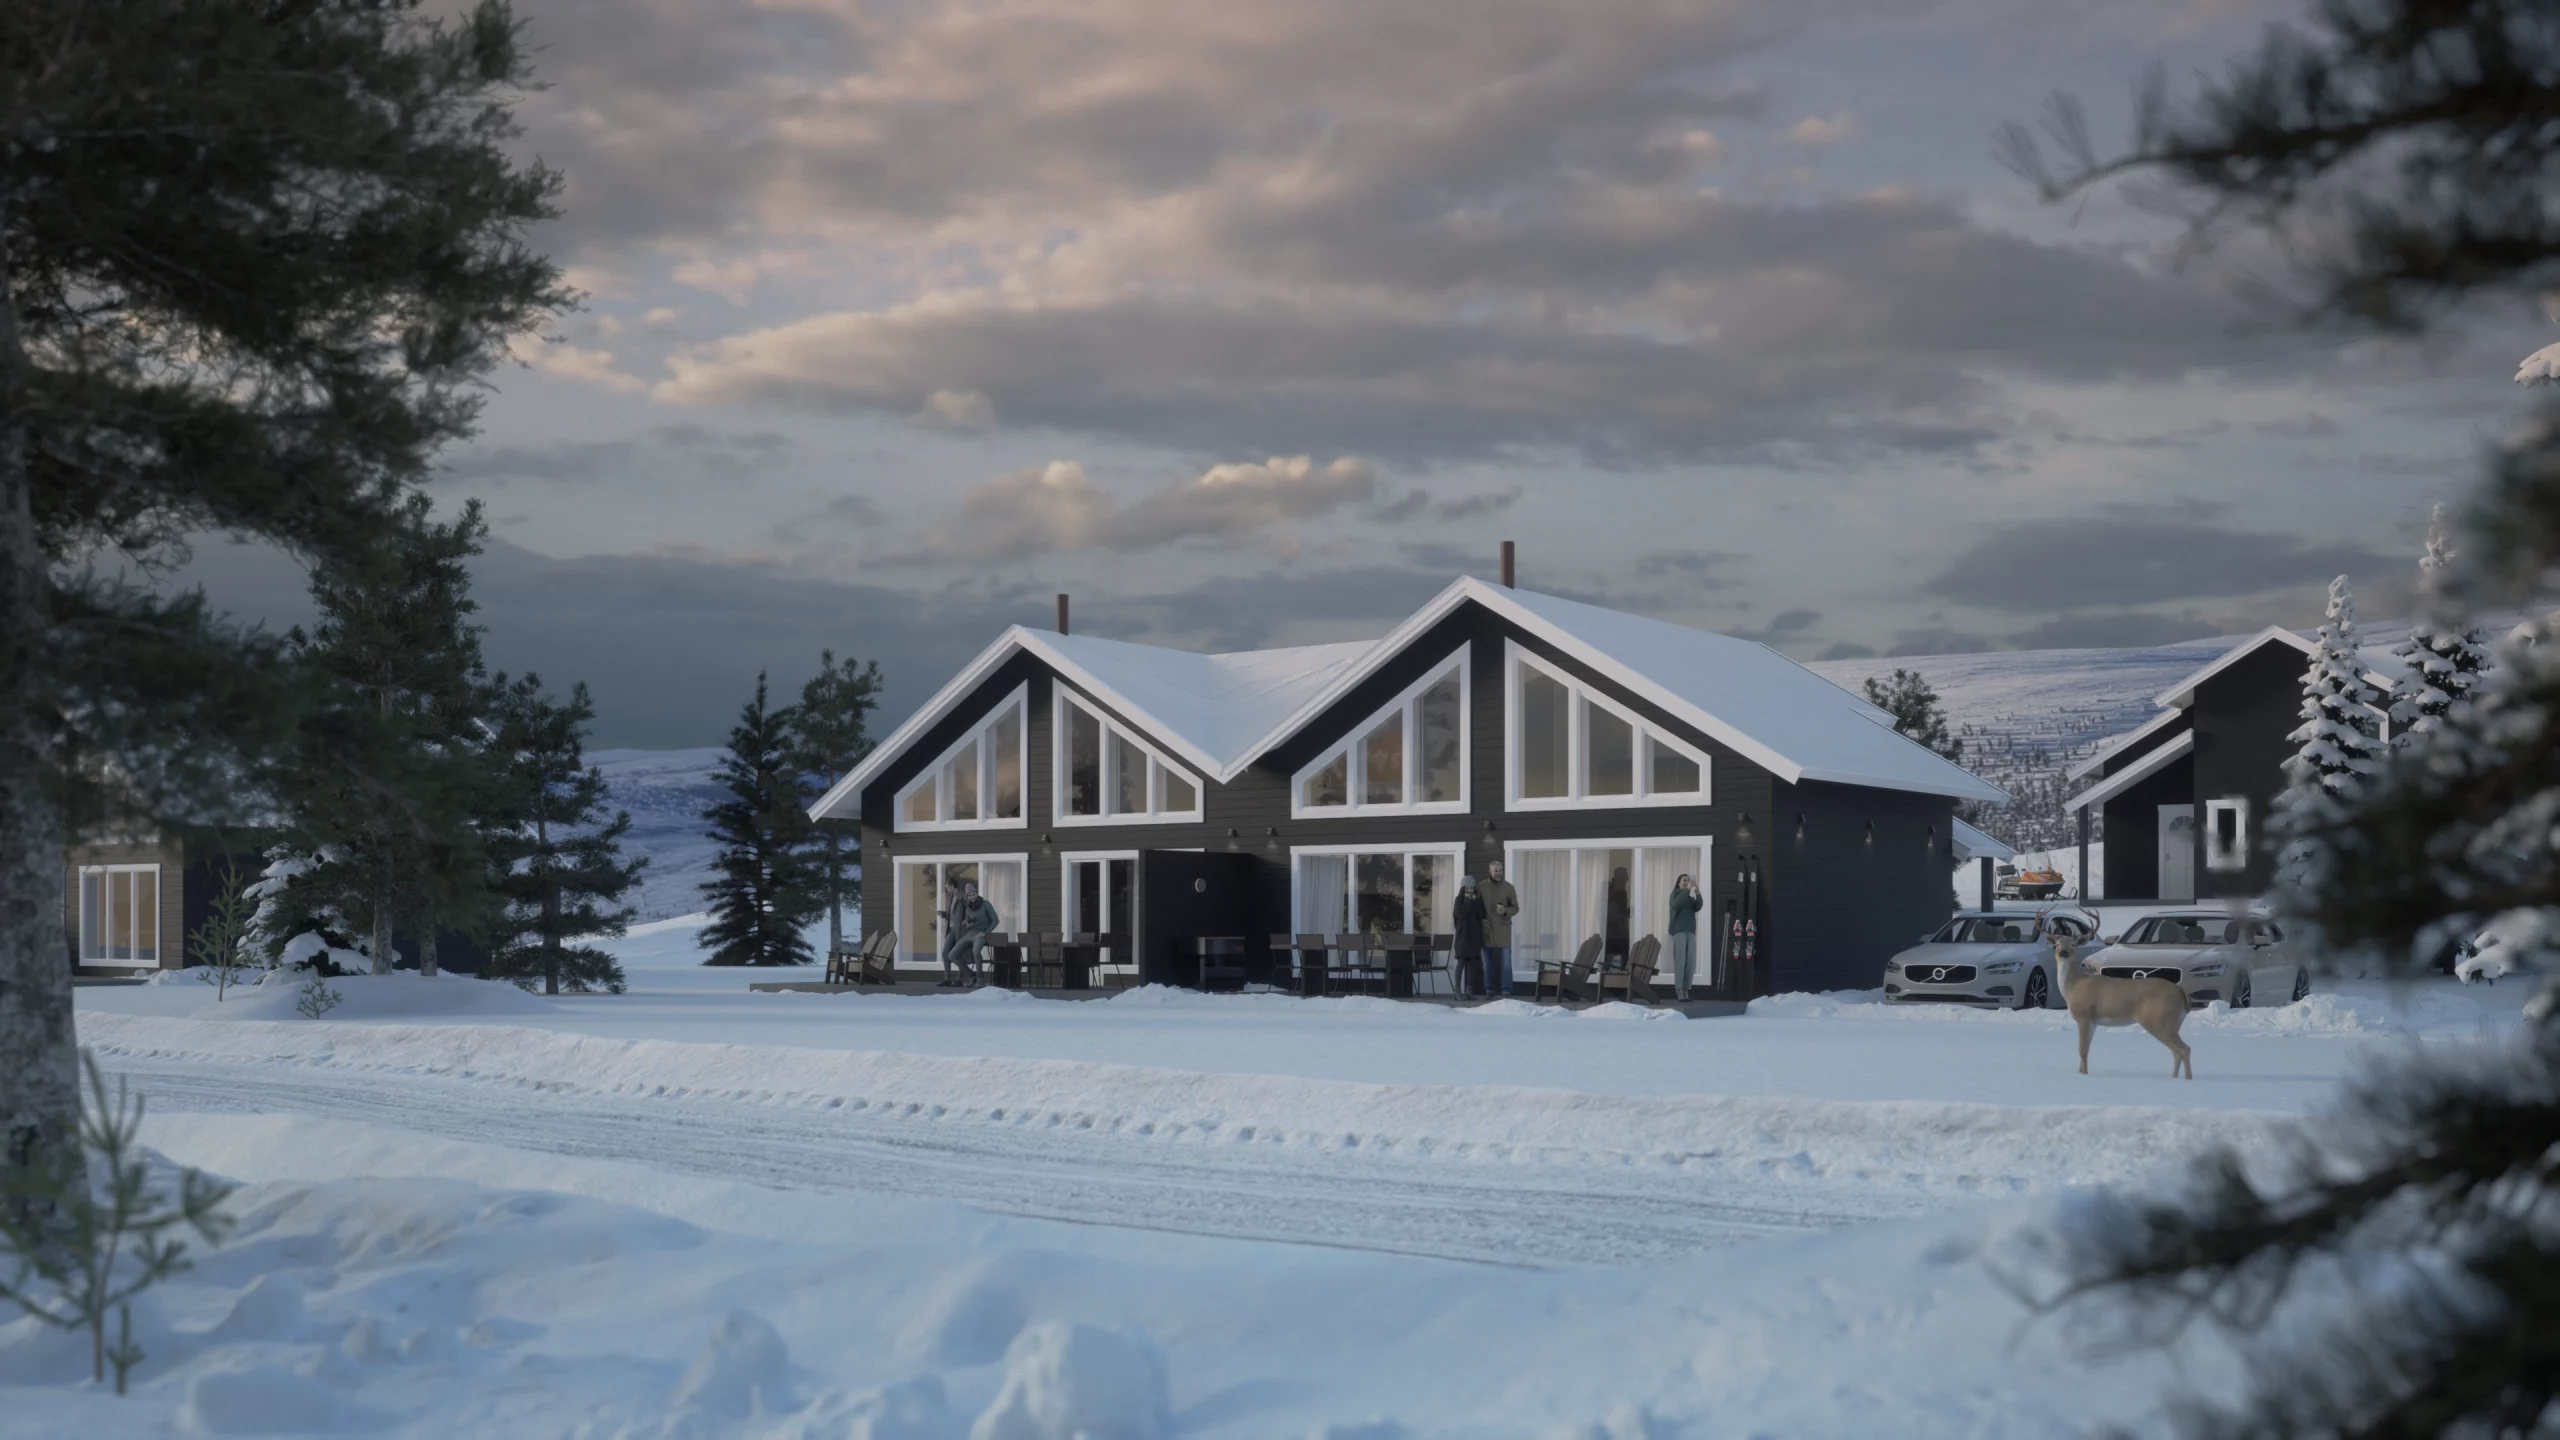 3D Architectural Render in a photo realistic style of a house in the Swedish mountains surrounded by snow.